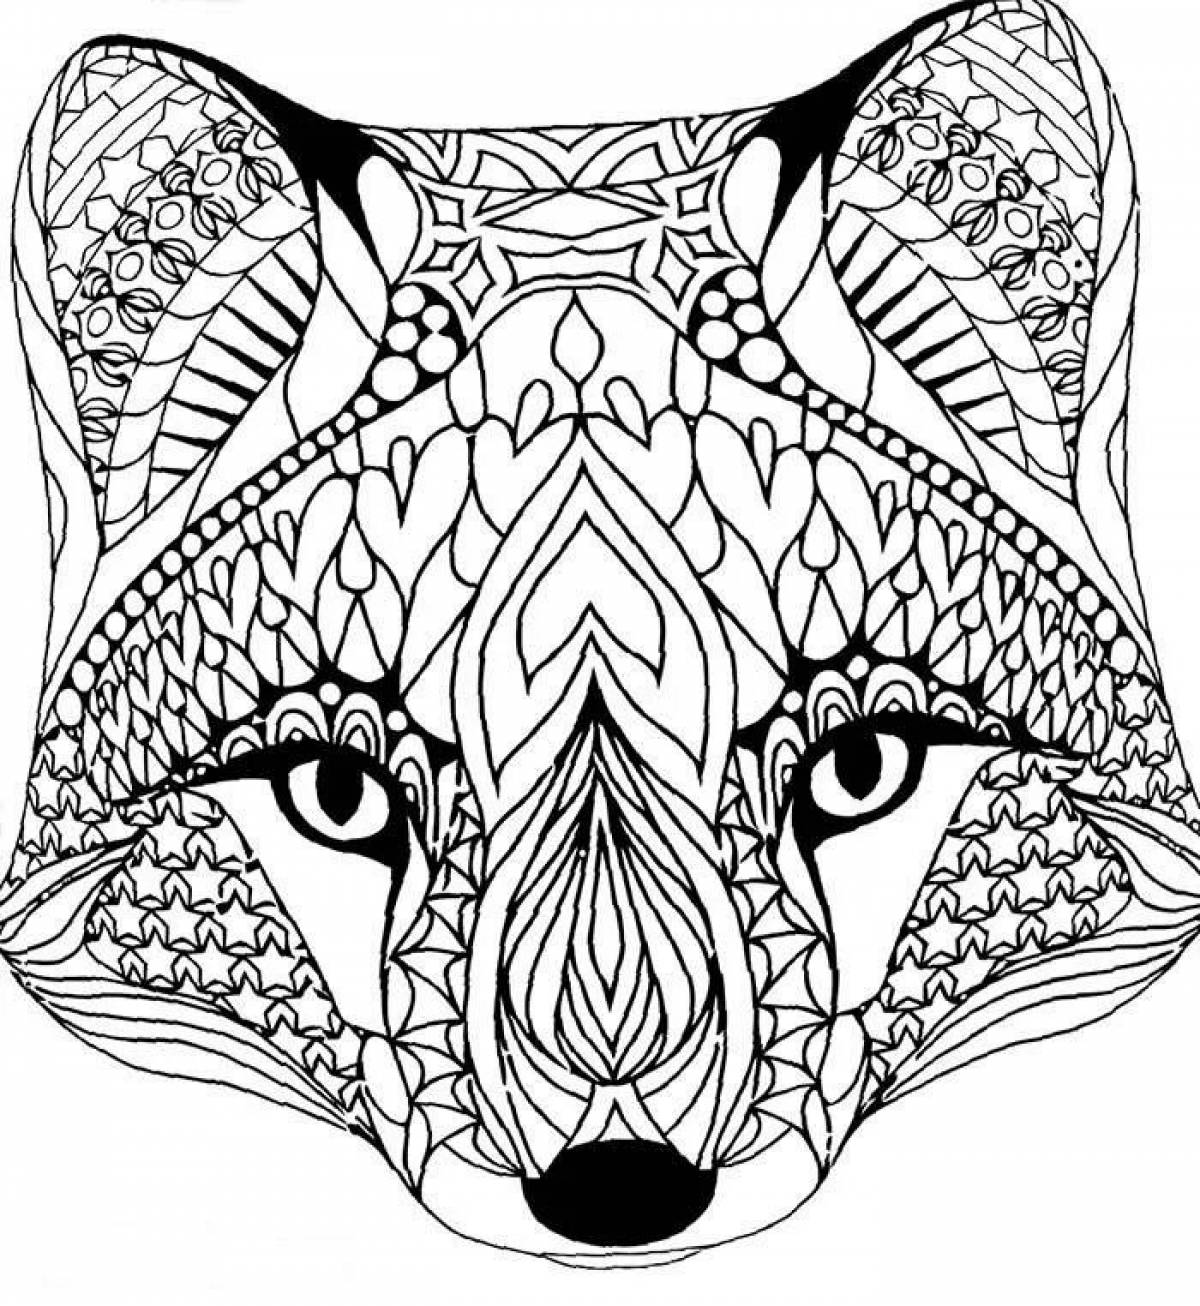 Sublime coloring page medium difficulty